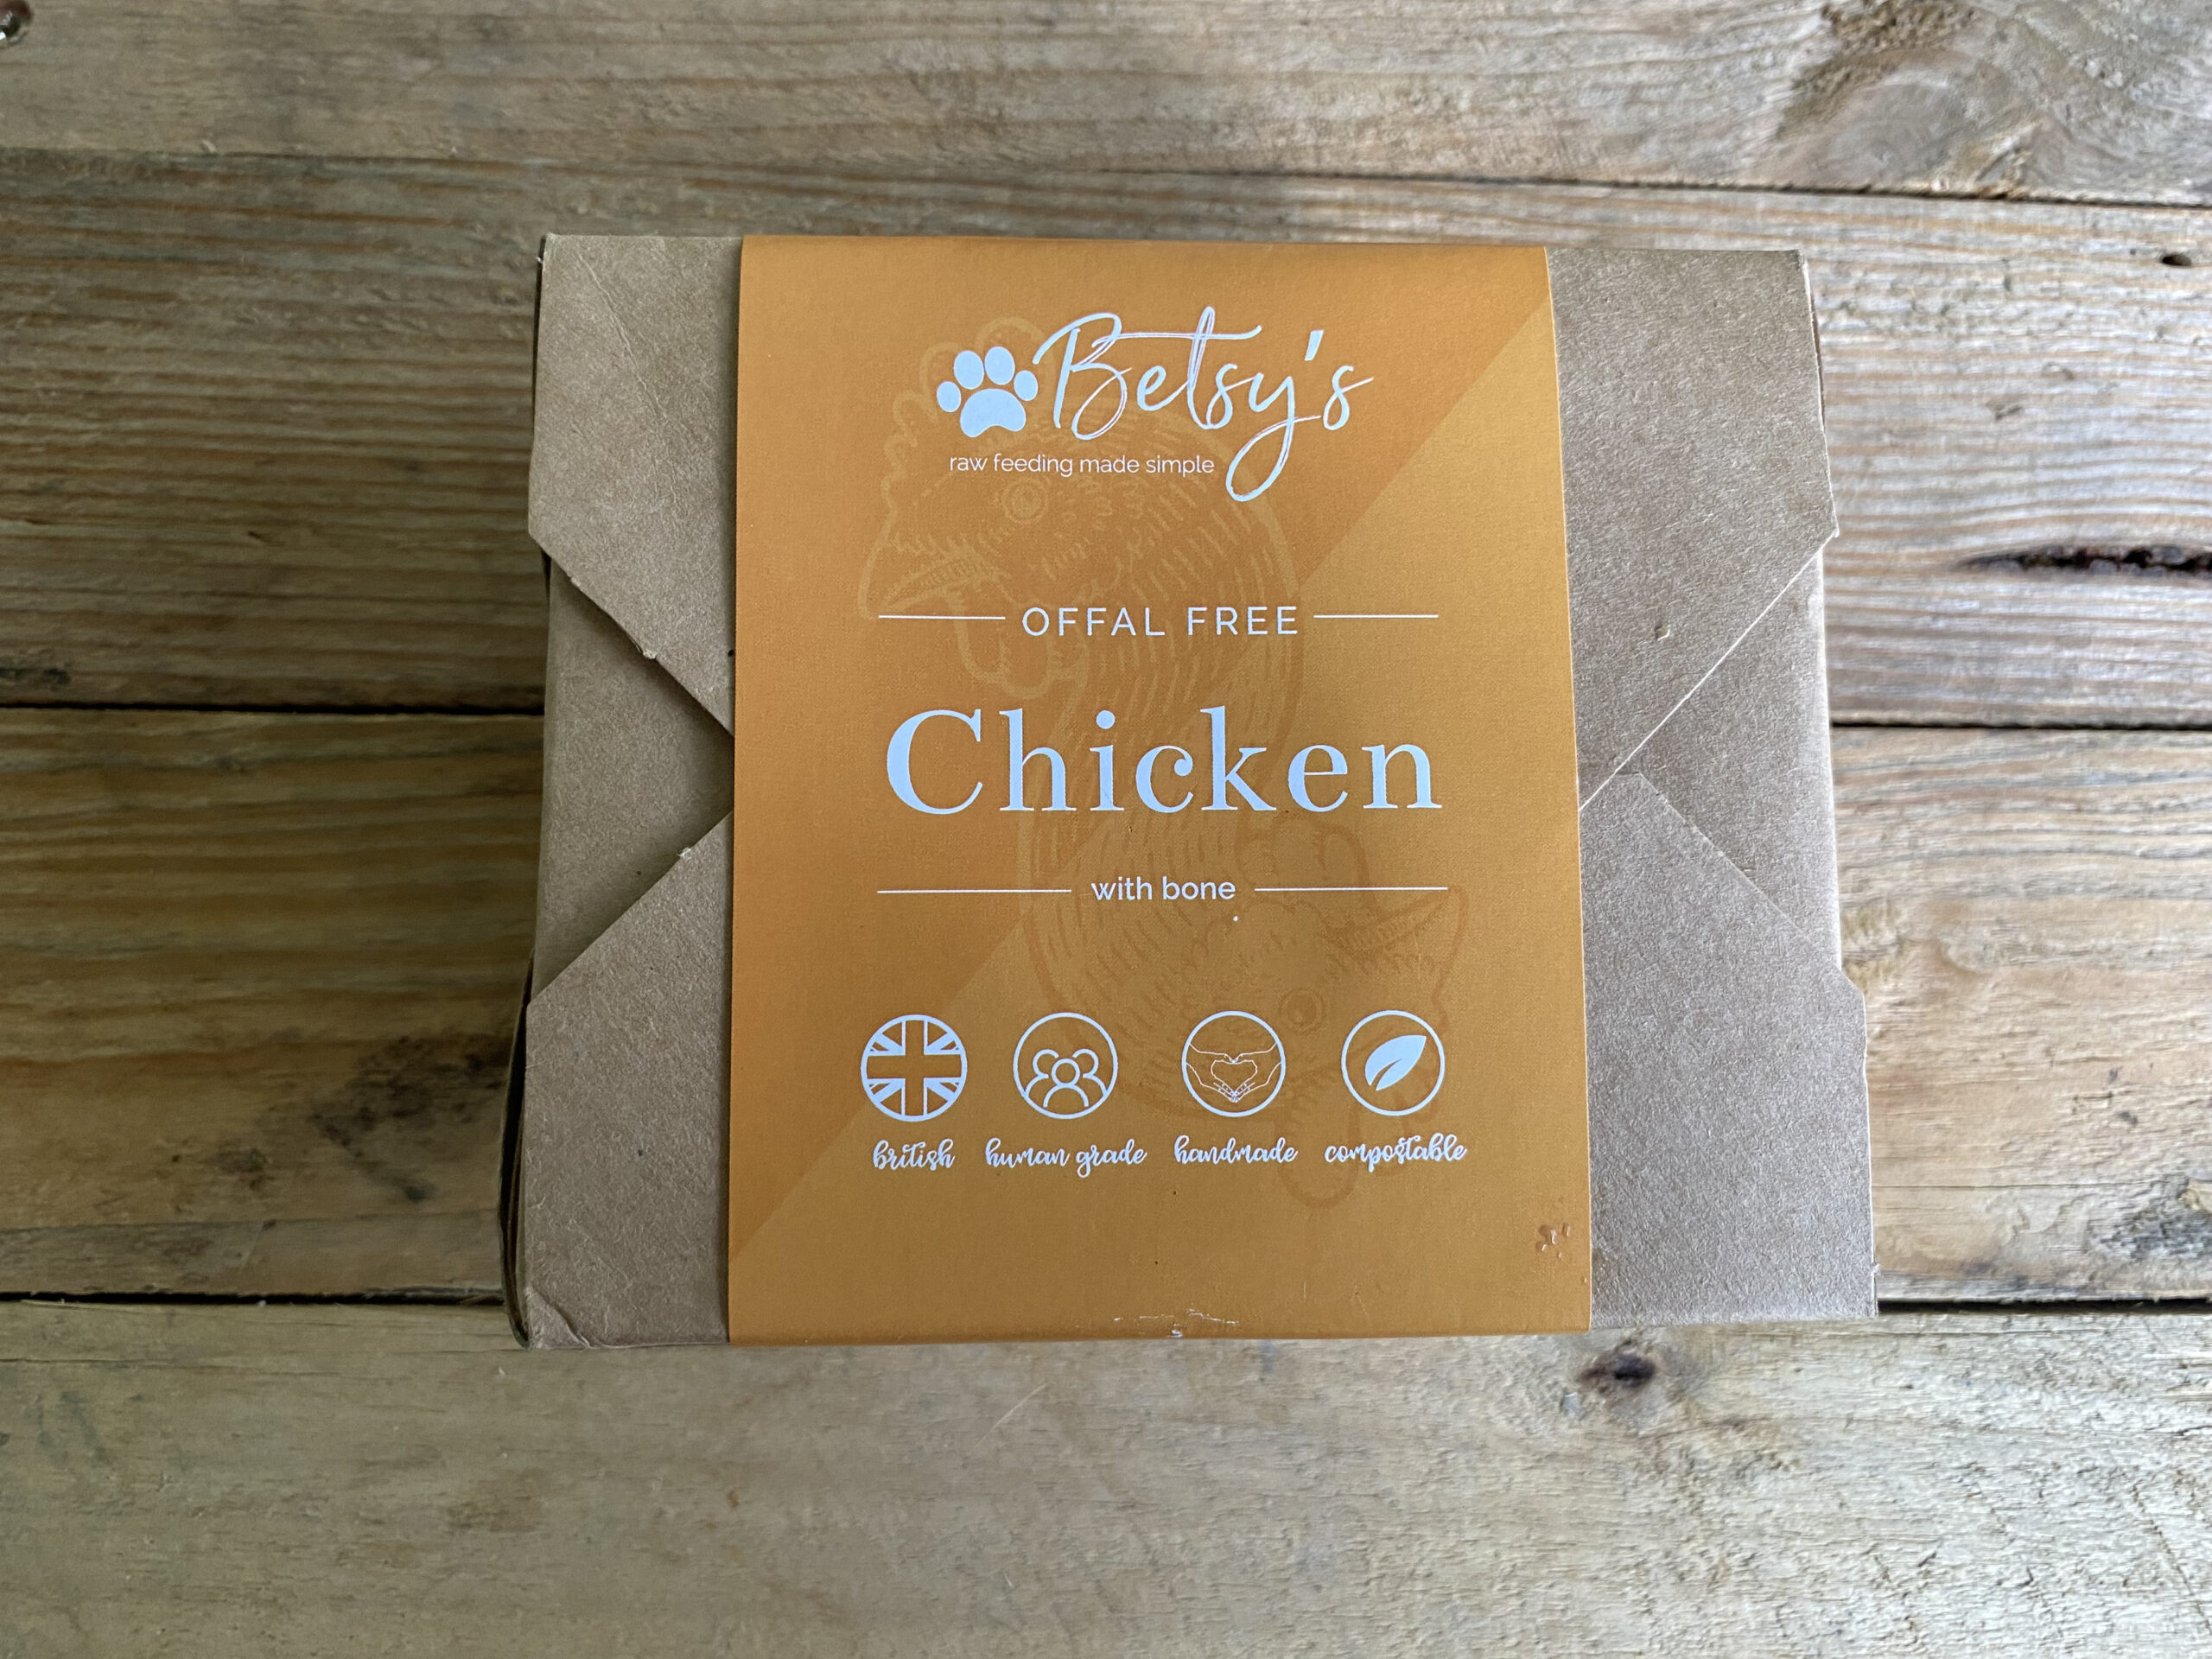 Betsy’s Offal Free Chicken – 500g